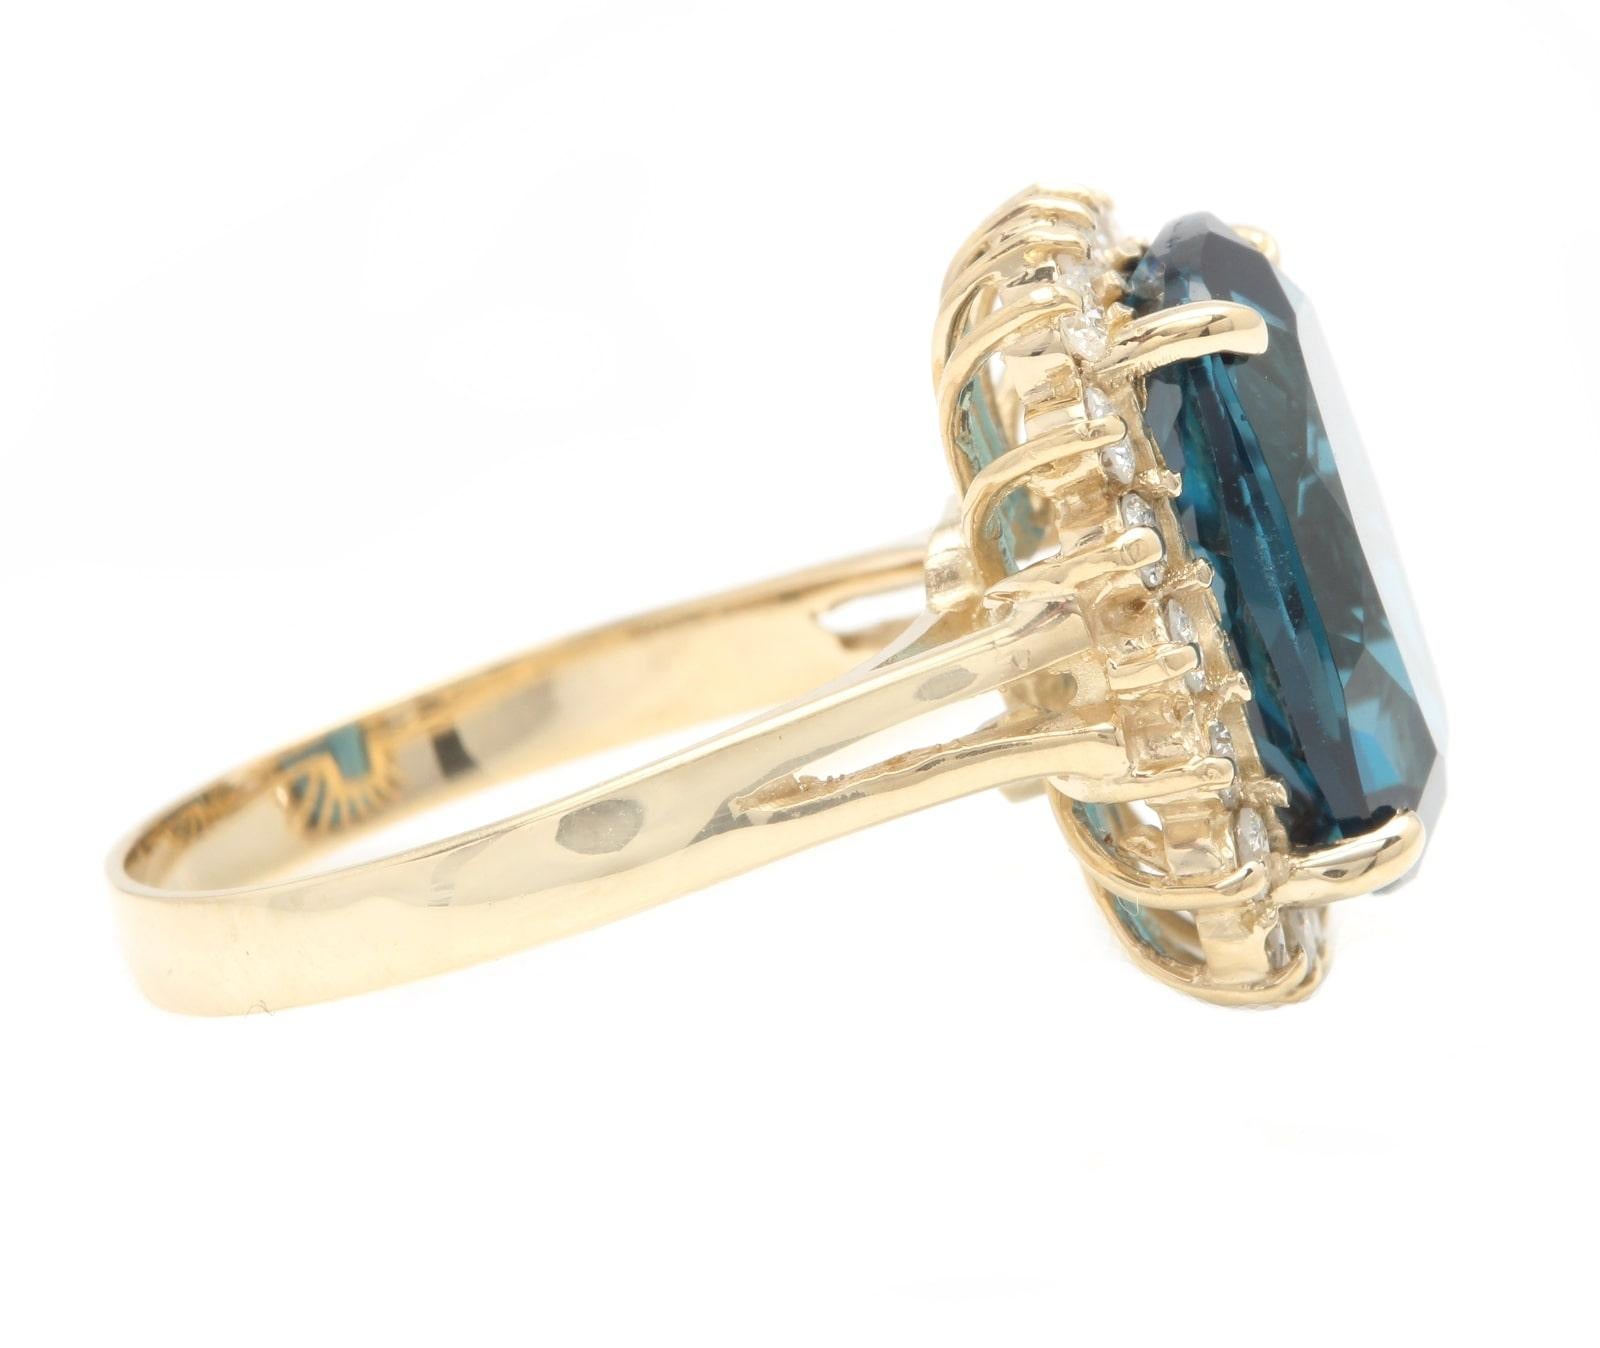 9.75 Carats Natural Impressive London Blue Topaz and Diamond 14K Yellow Gold Ring

Suggested Replacement Value Approx. $6,000.00

Total Natural London Blue Topaz Weight: Approx. 9.00 Carats (Heated, Irradiated)

London Blue Topaz Measures: Approx.